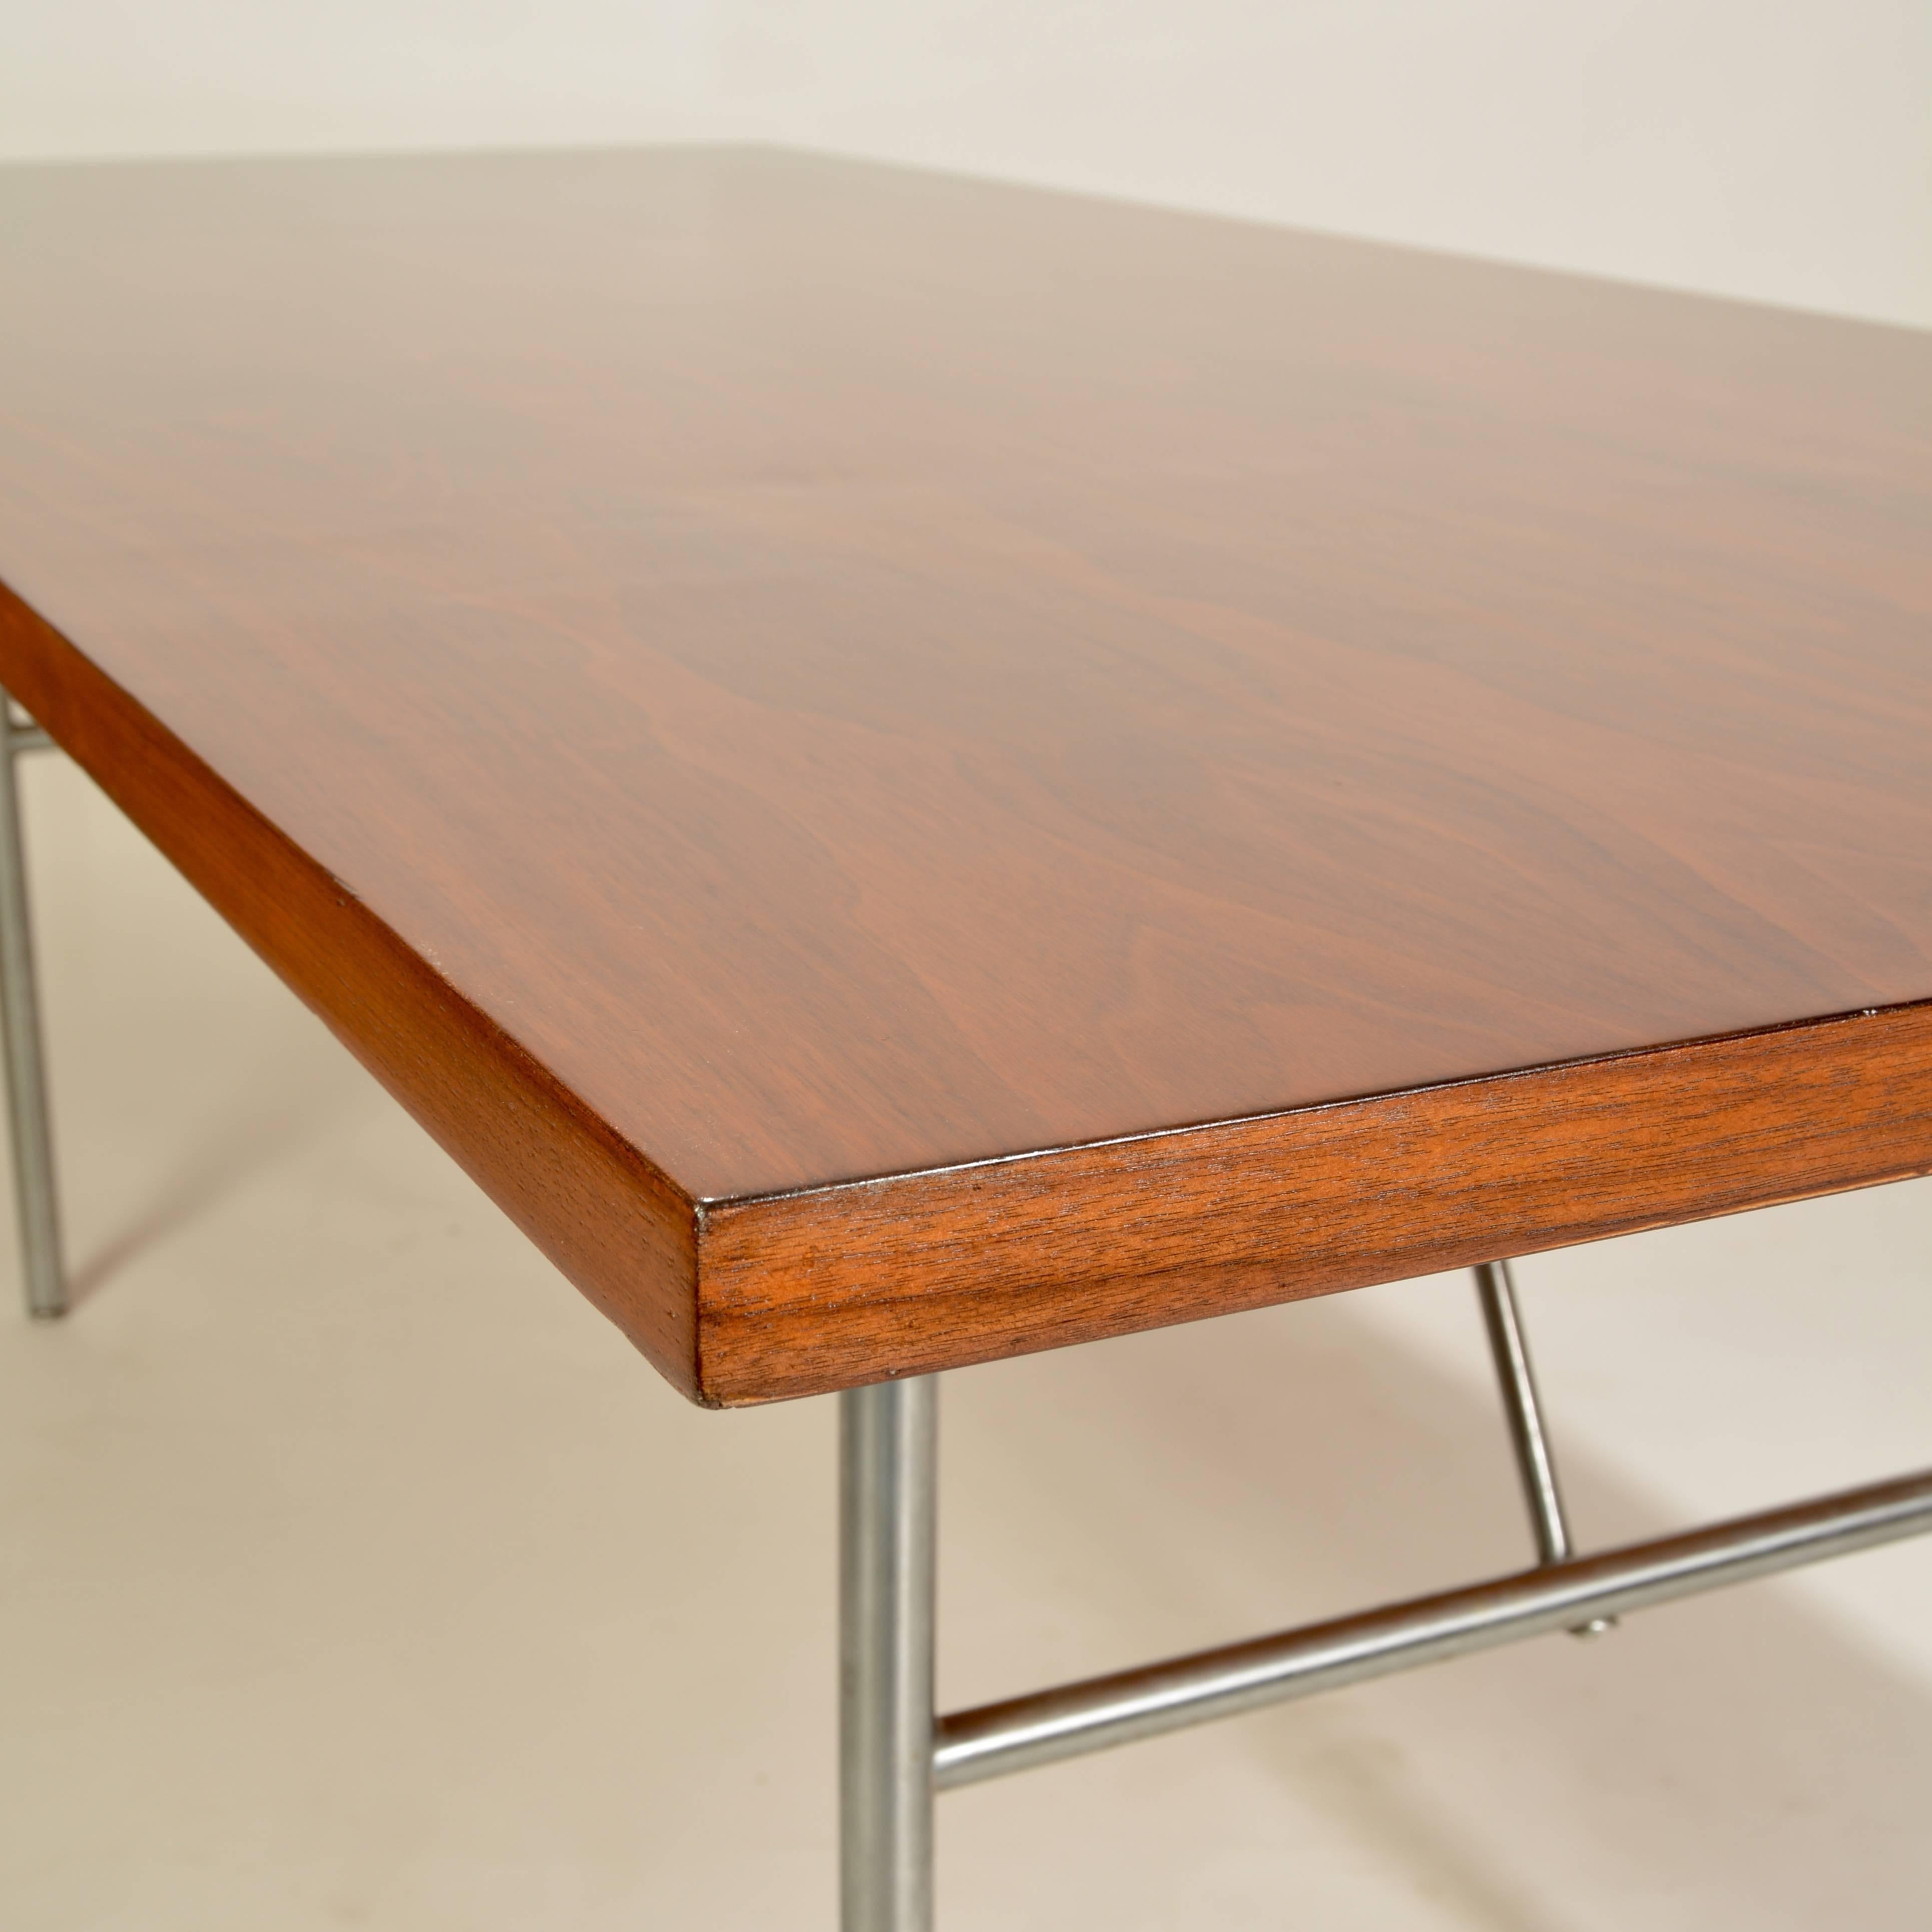 Mid-20th Century George Nelson Conference Table in Walnut for Herman Miller